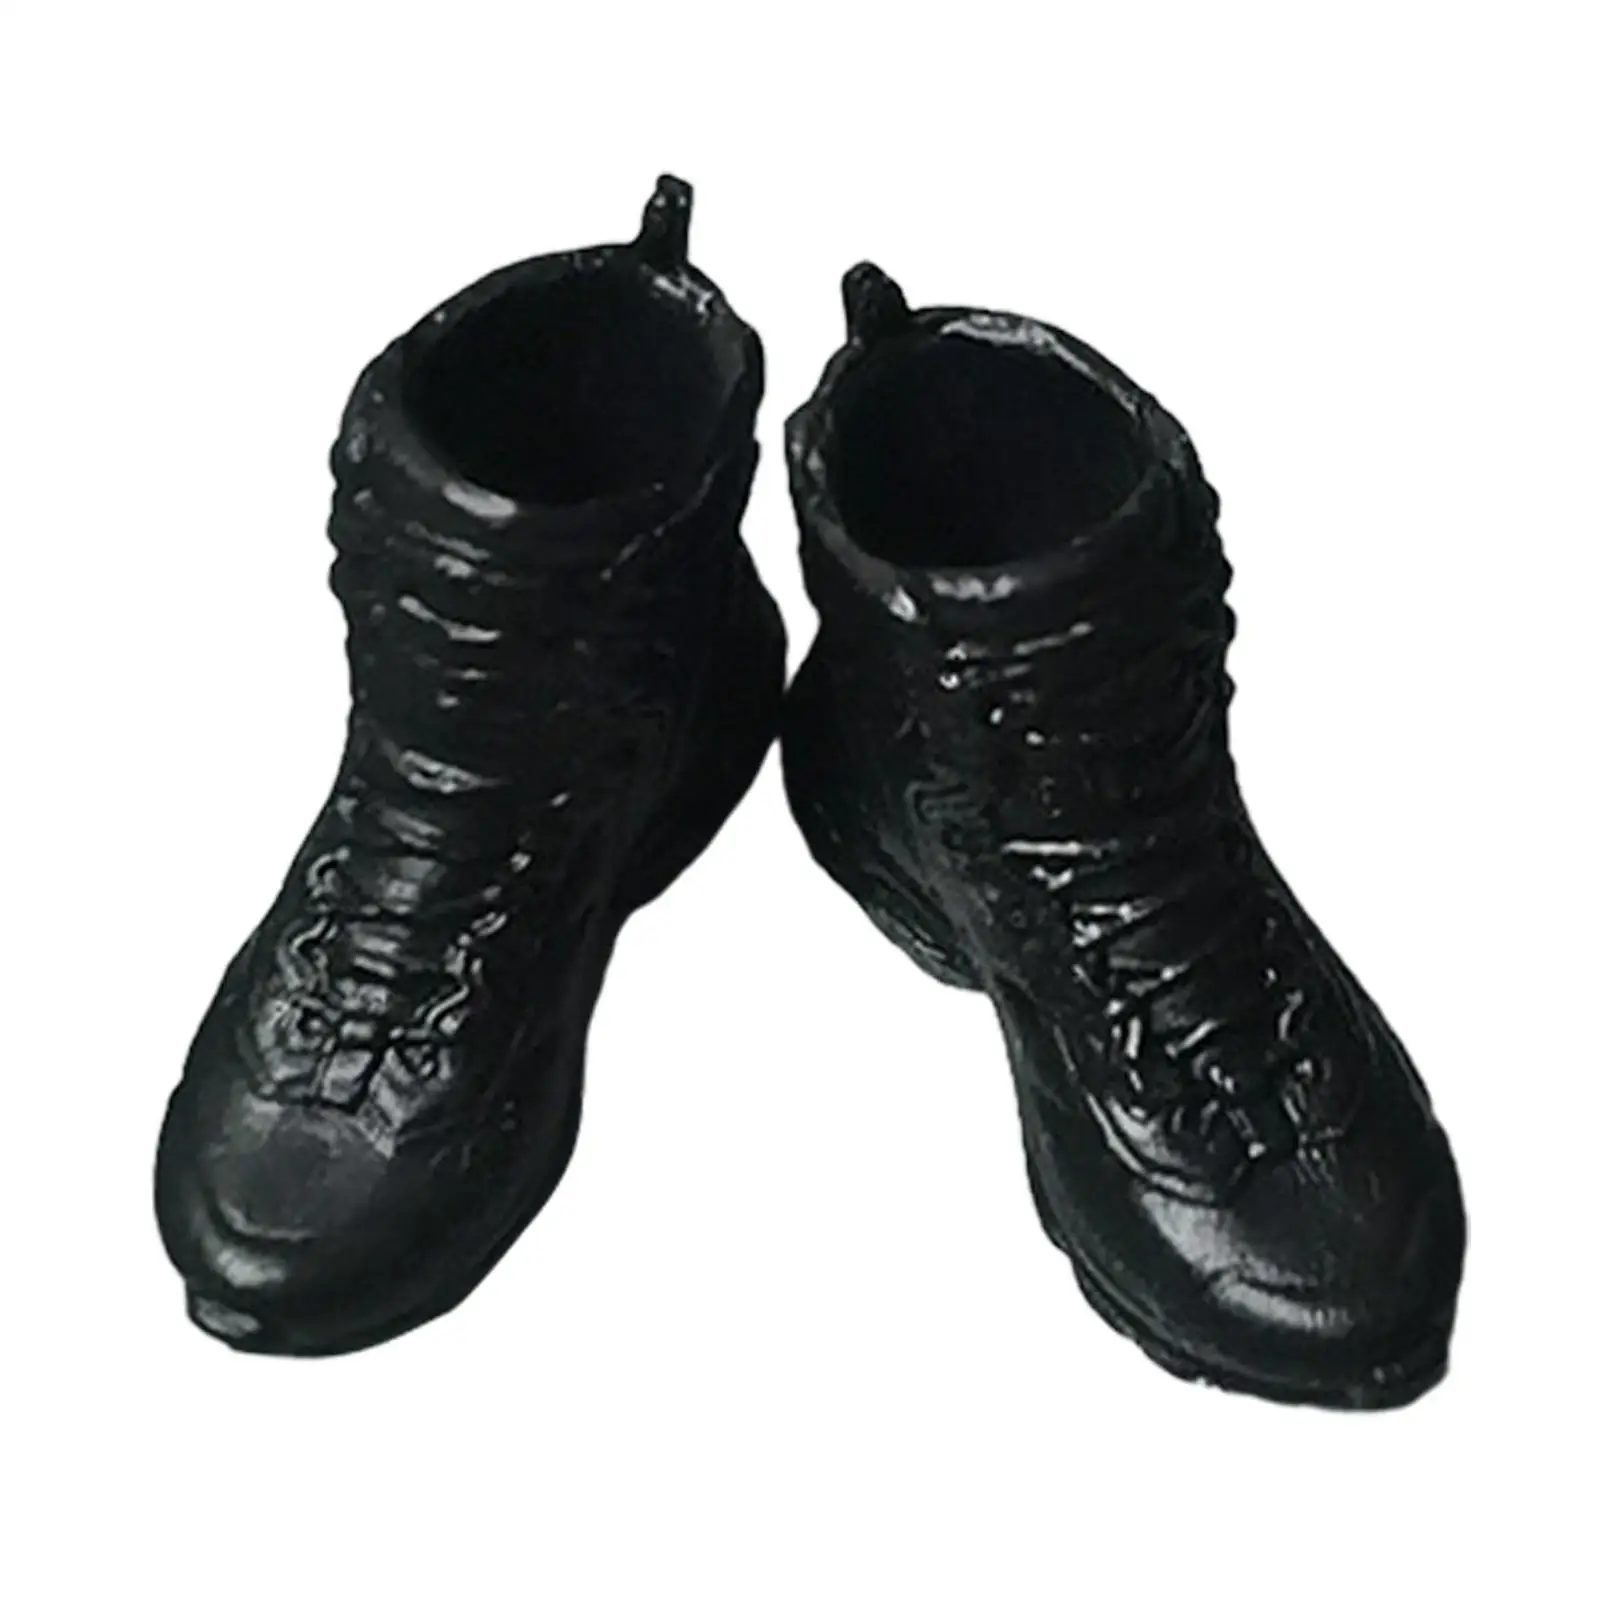 1/12 Male Shoes Fashion Miniature Figure Shoes Doll Figures Accessory for 6 inch Doll Model Male Action Figures Dress up Accs